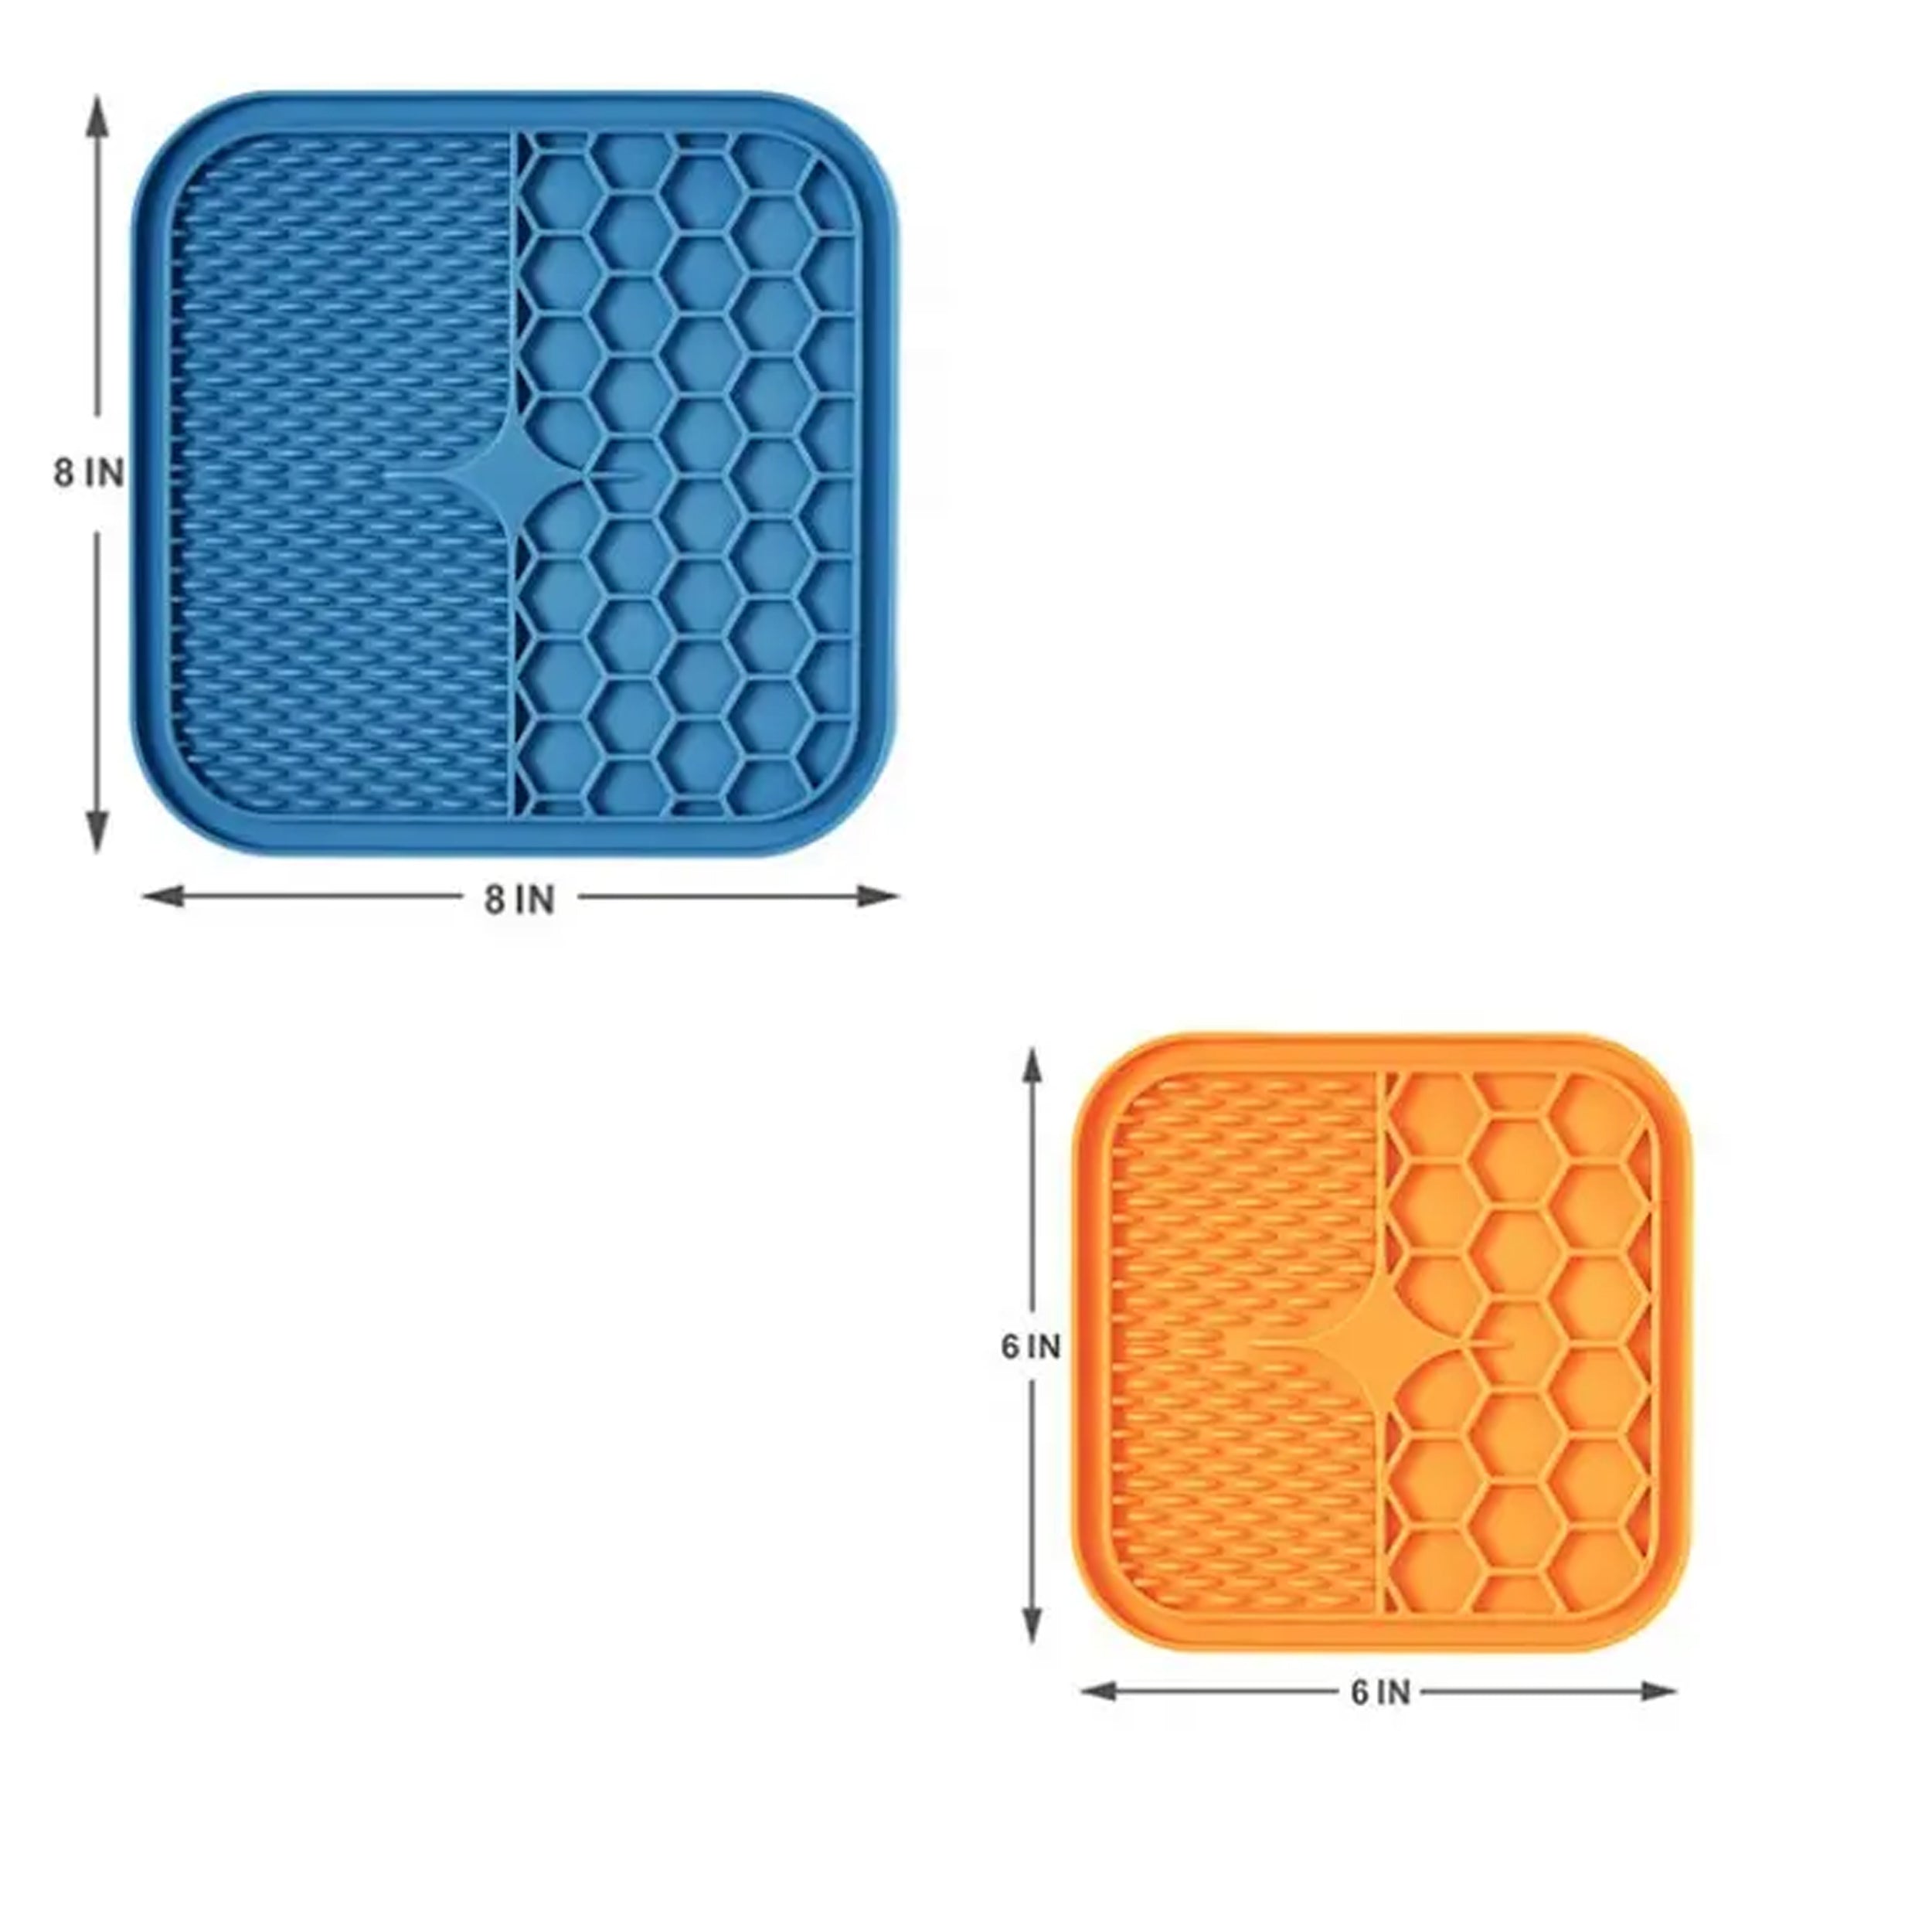 Dog Lick Pad - Silicone Treat Feeding Licking Mats with Suction - Slow Food Pad Mat For Dogs